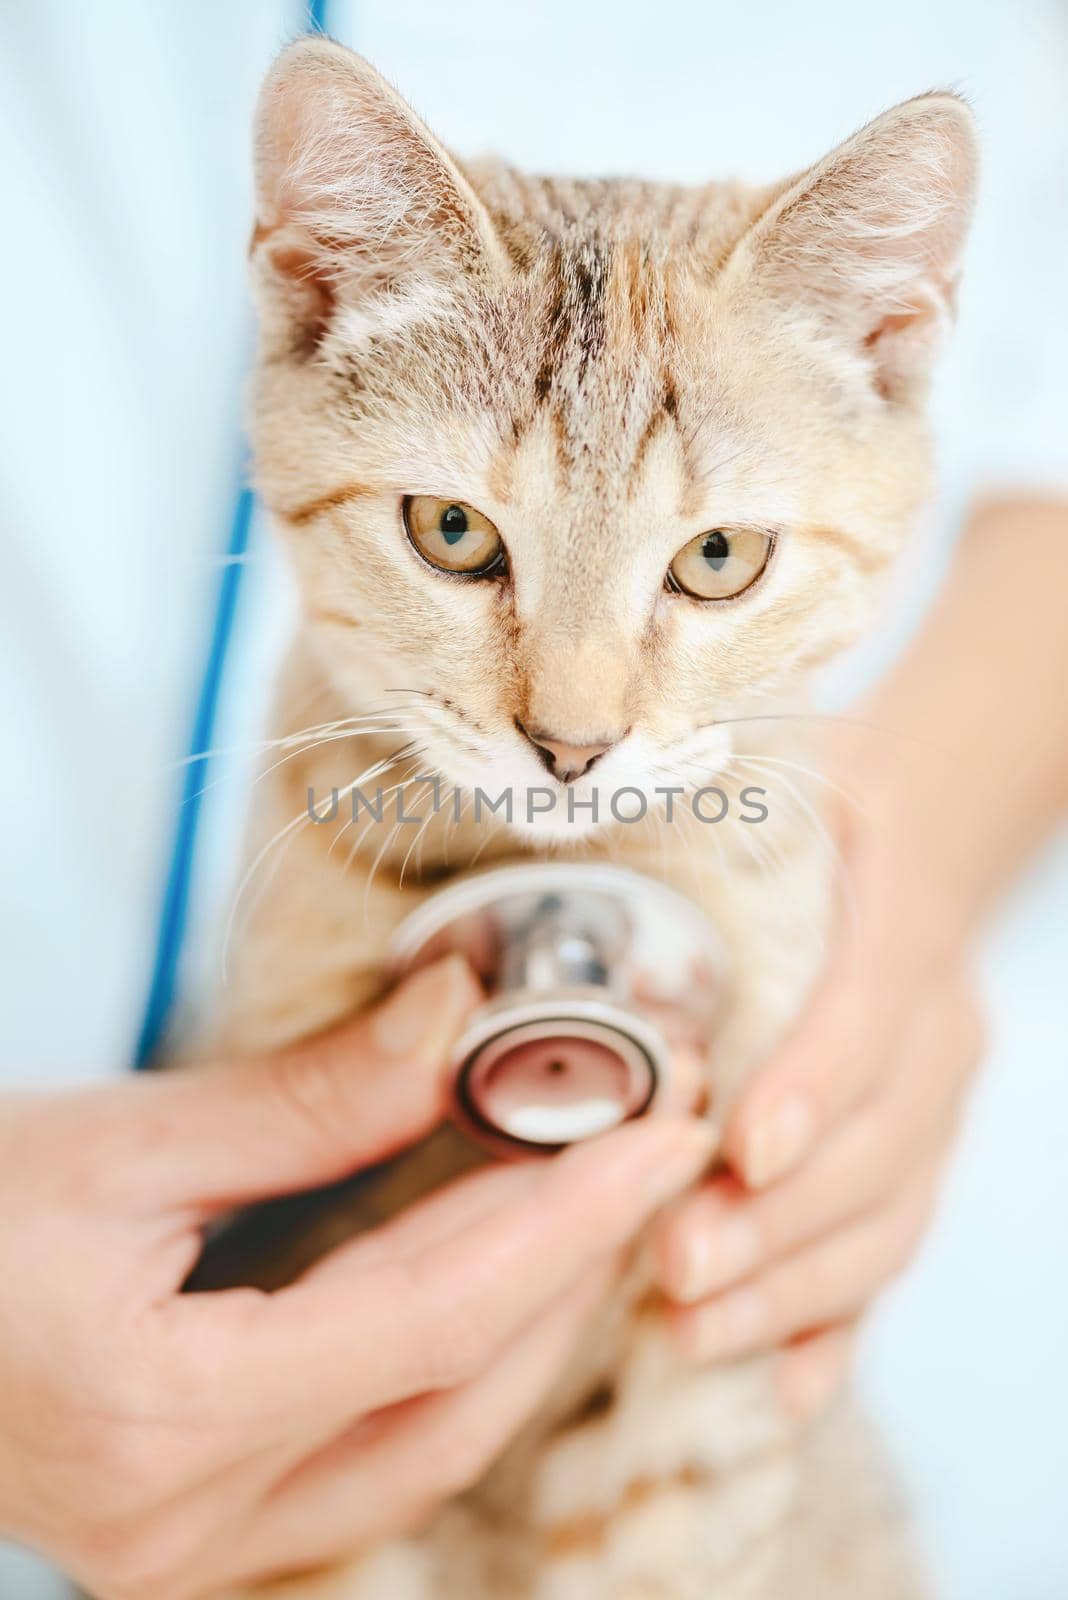 Veterinarian checkup with stethoscope a kitten of tortoiseshell color, close-up view of hands of doctor.